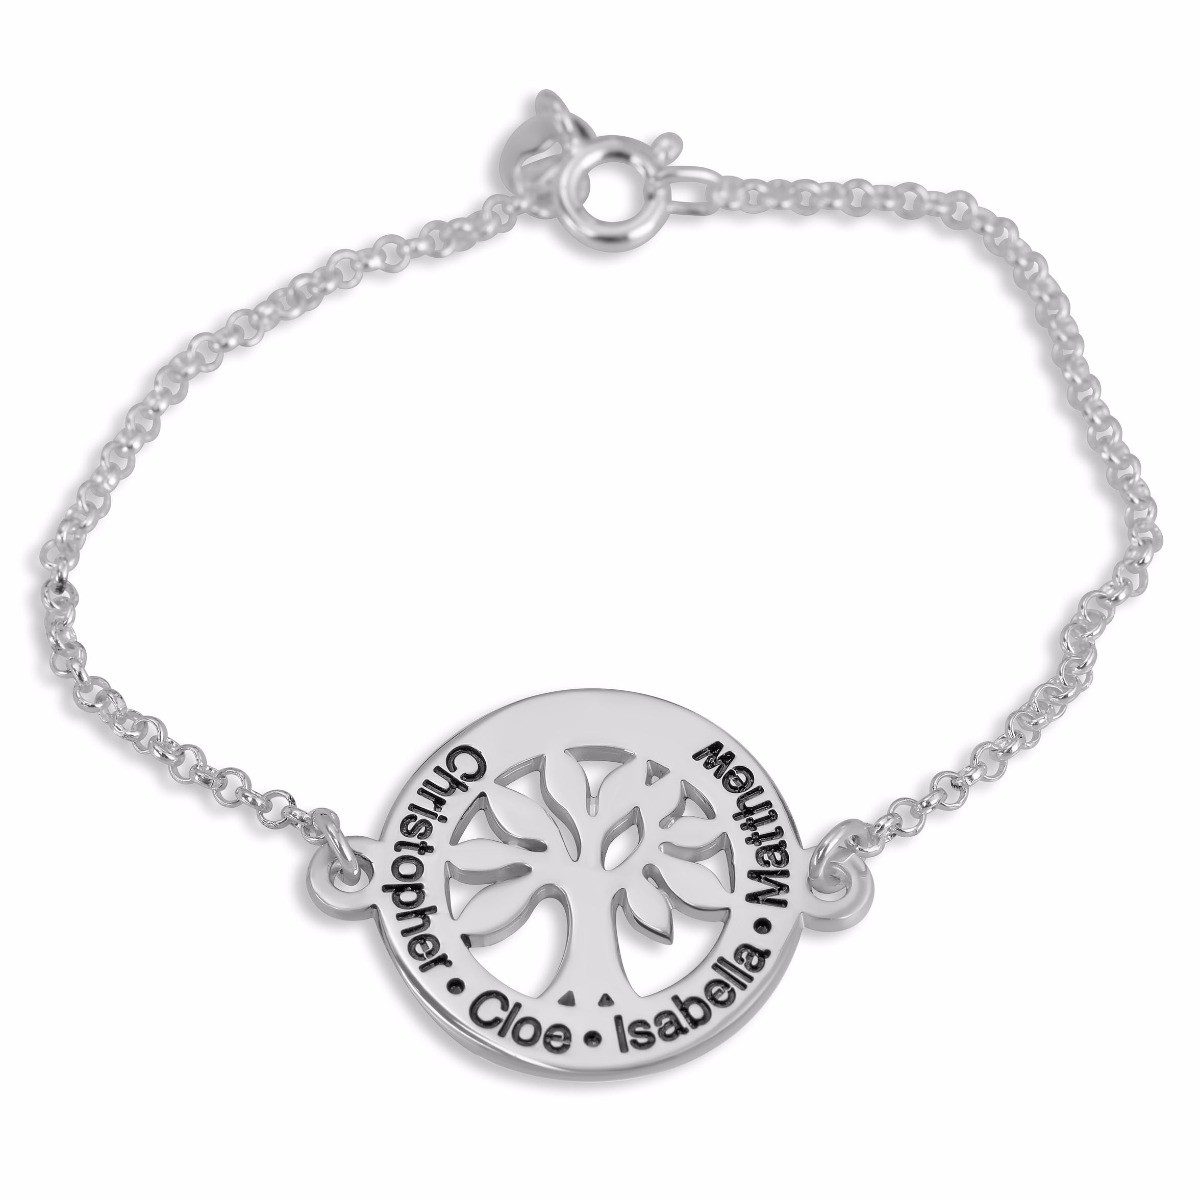 Double Thickness Sterling Silver English/Hebrew Family Tree Personalized Name Bracelet  - 1